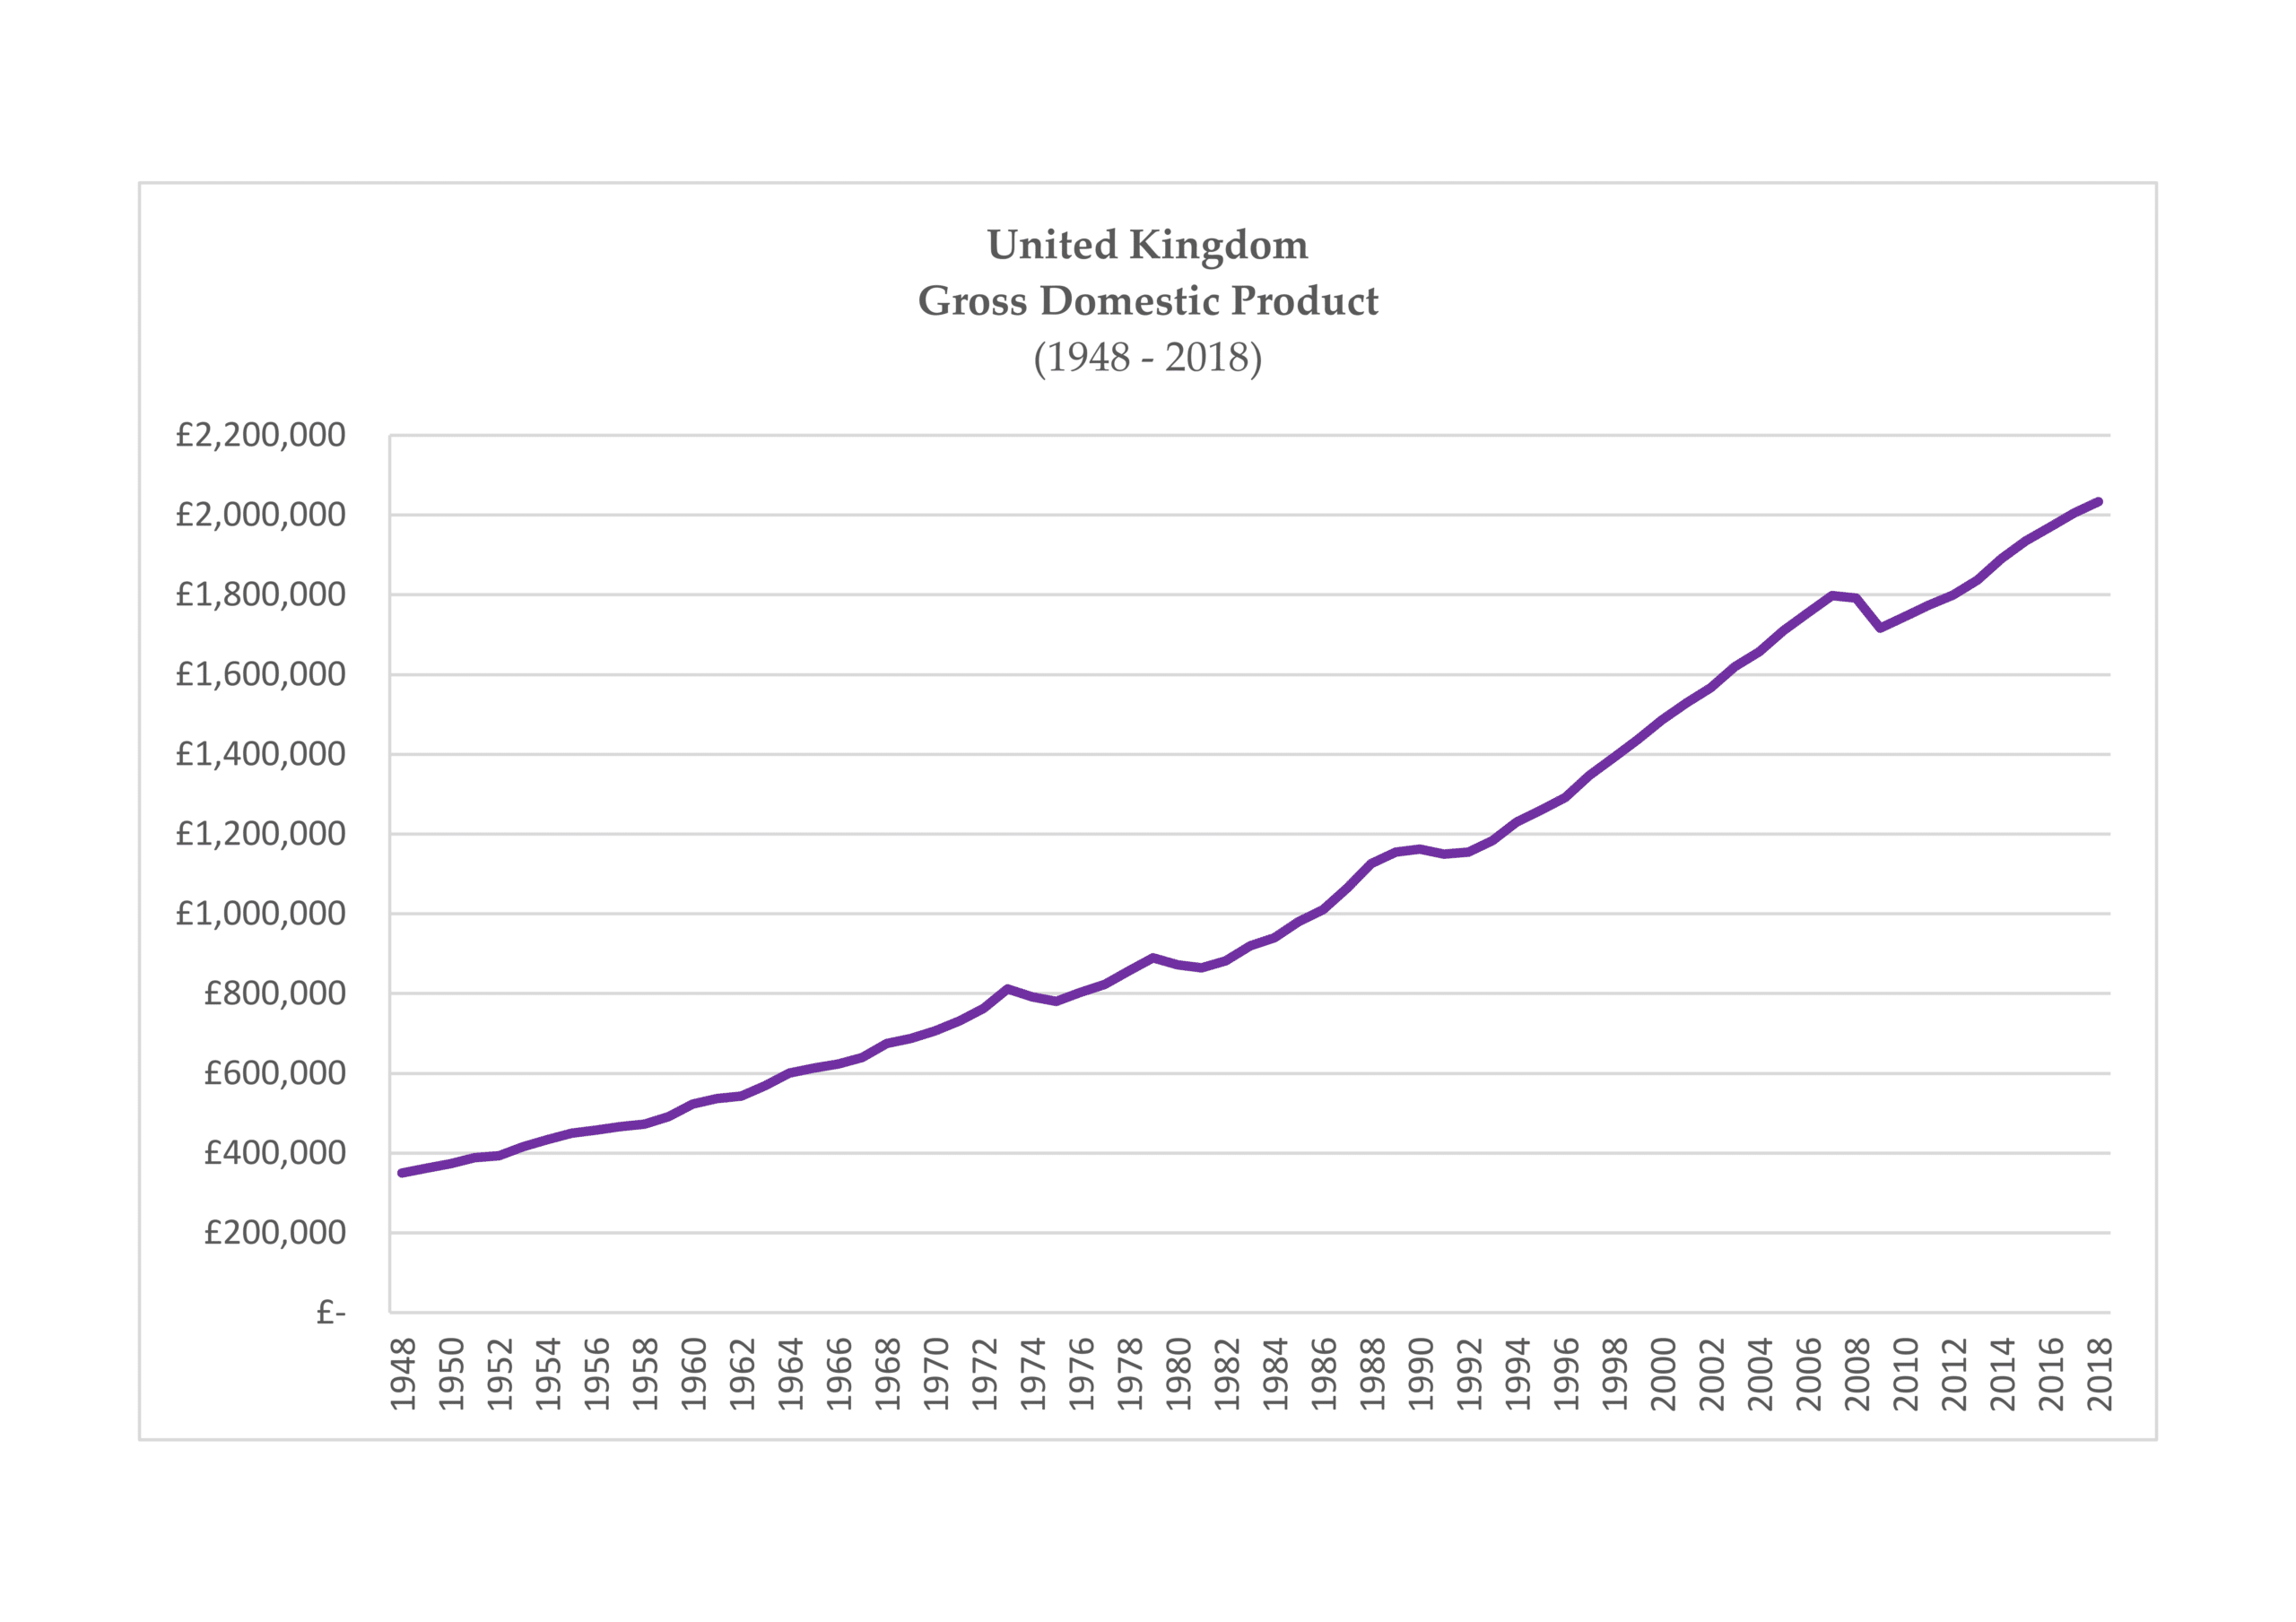 UK GDP from 1948 to 2018